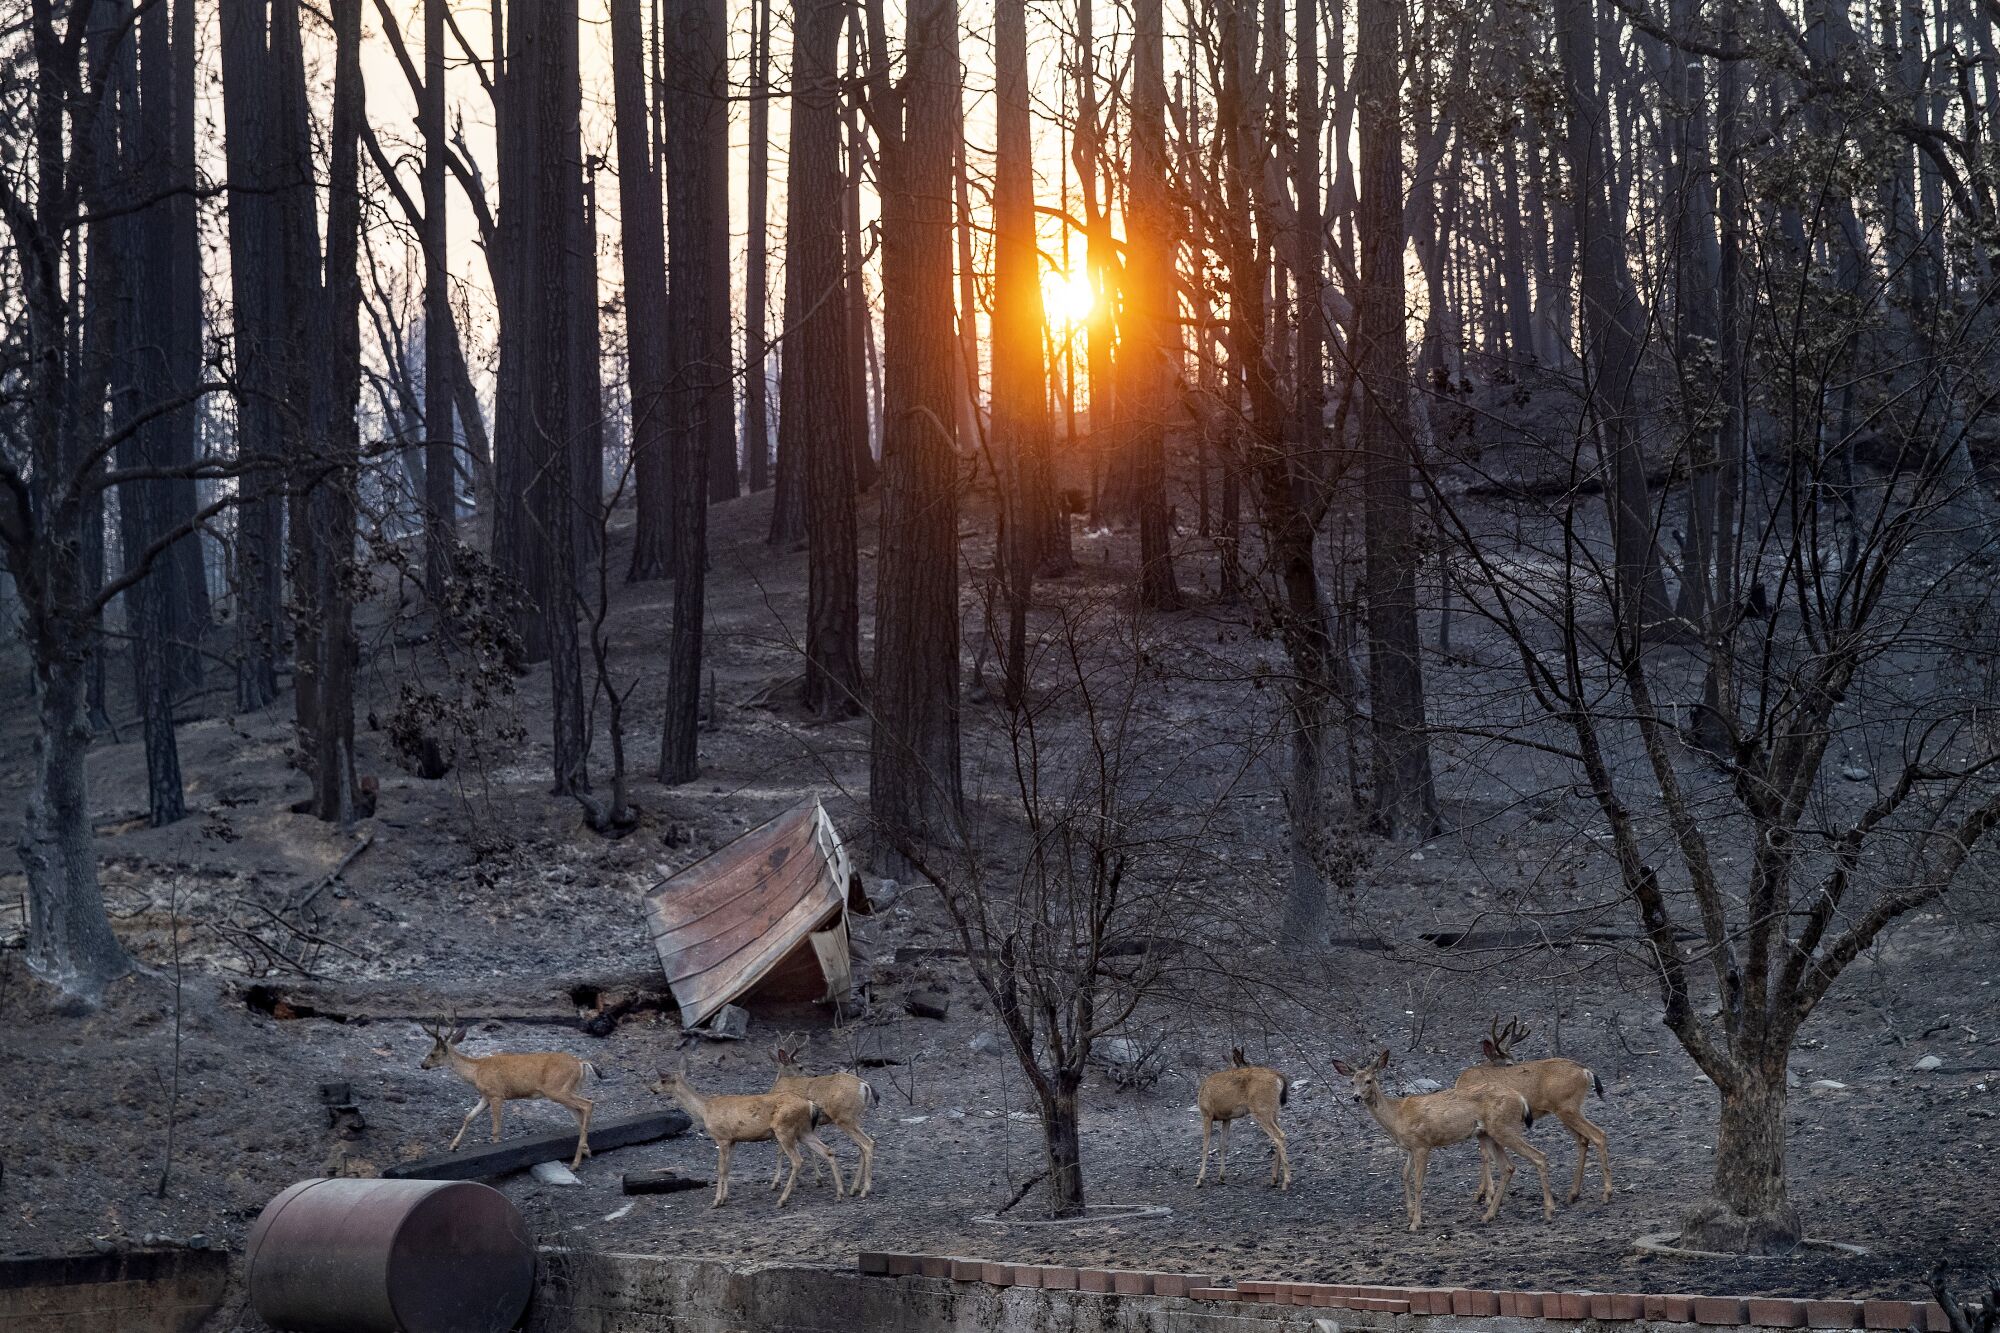 Deer, searching for food at the end of the day, make their way past scorched trees as seen along Main St. in Greenville.